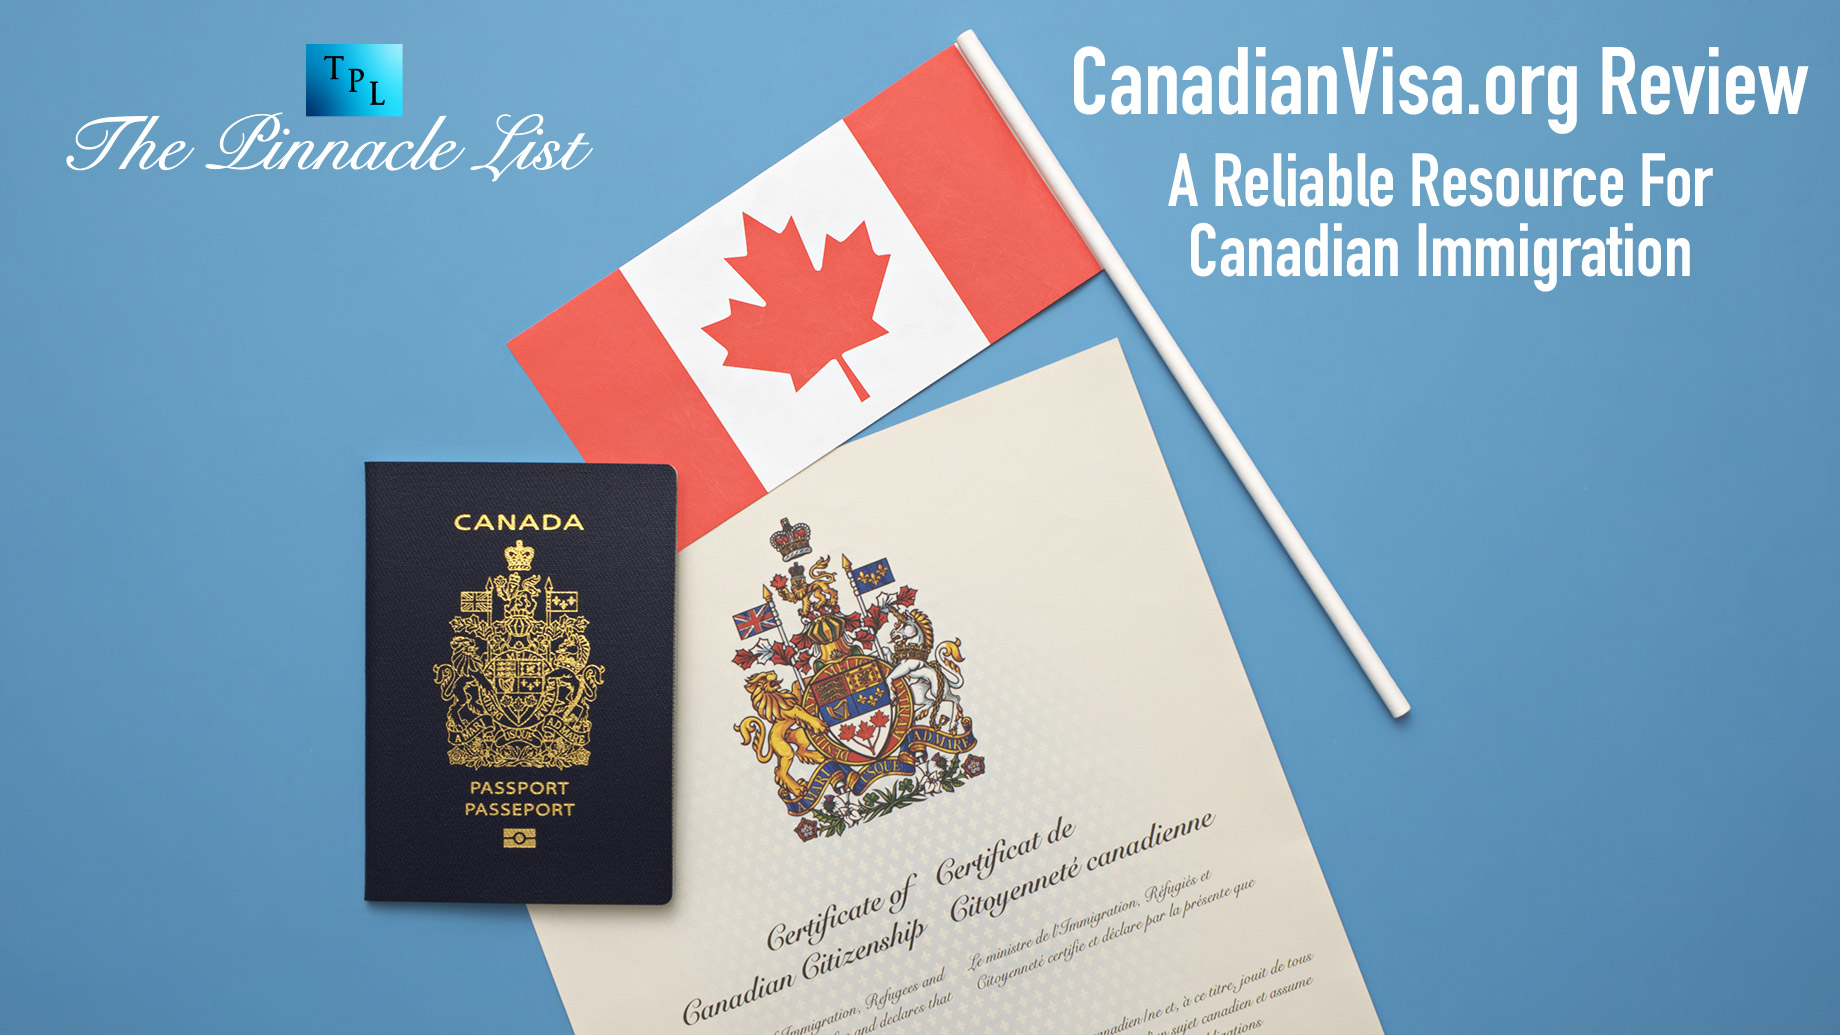 CanadianVisa.org Review: A Reliable Resource For Canadian Immigration